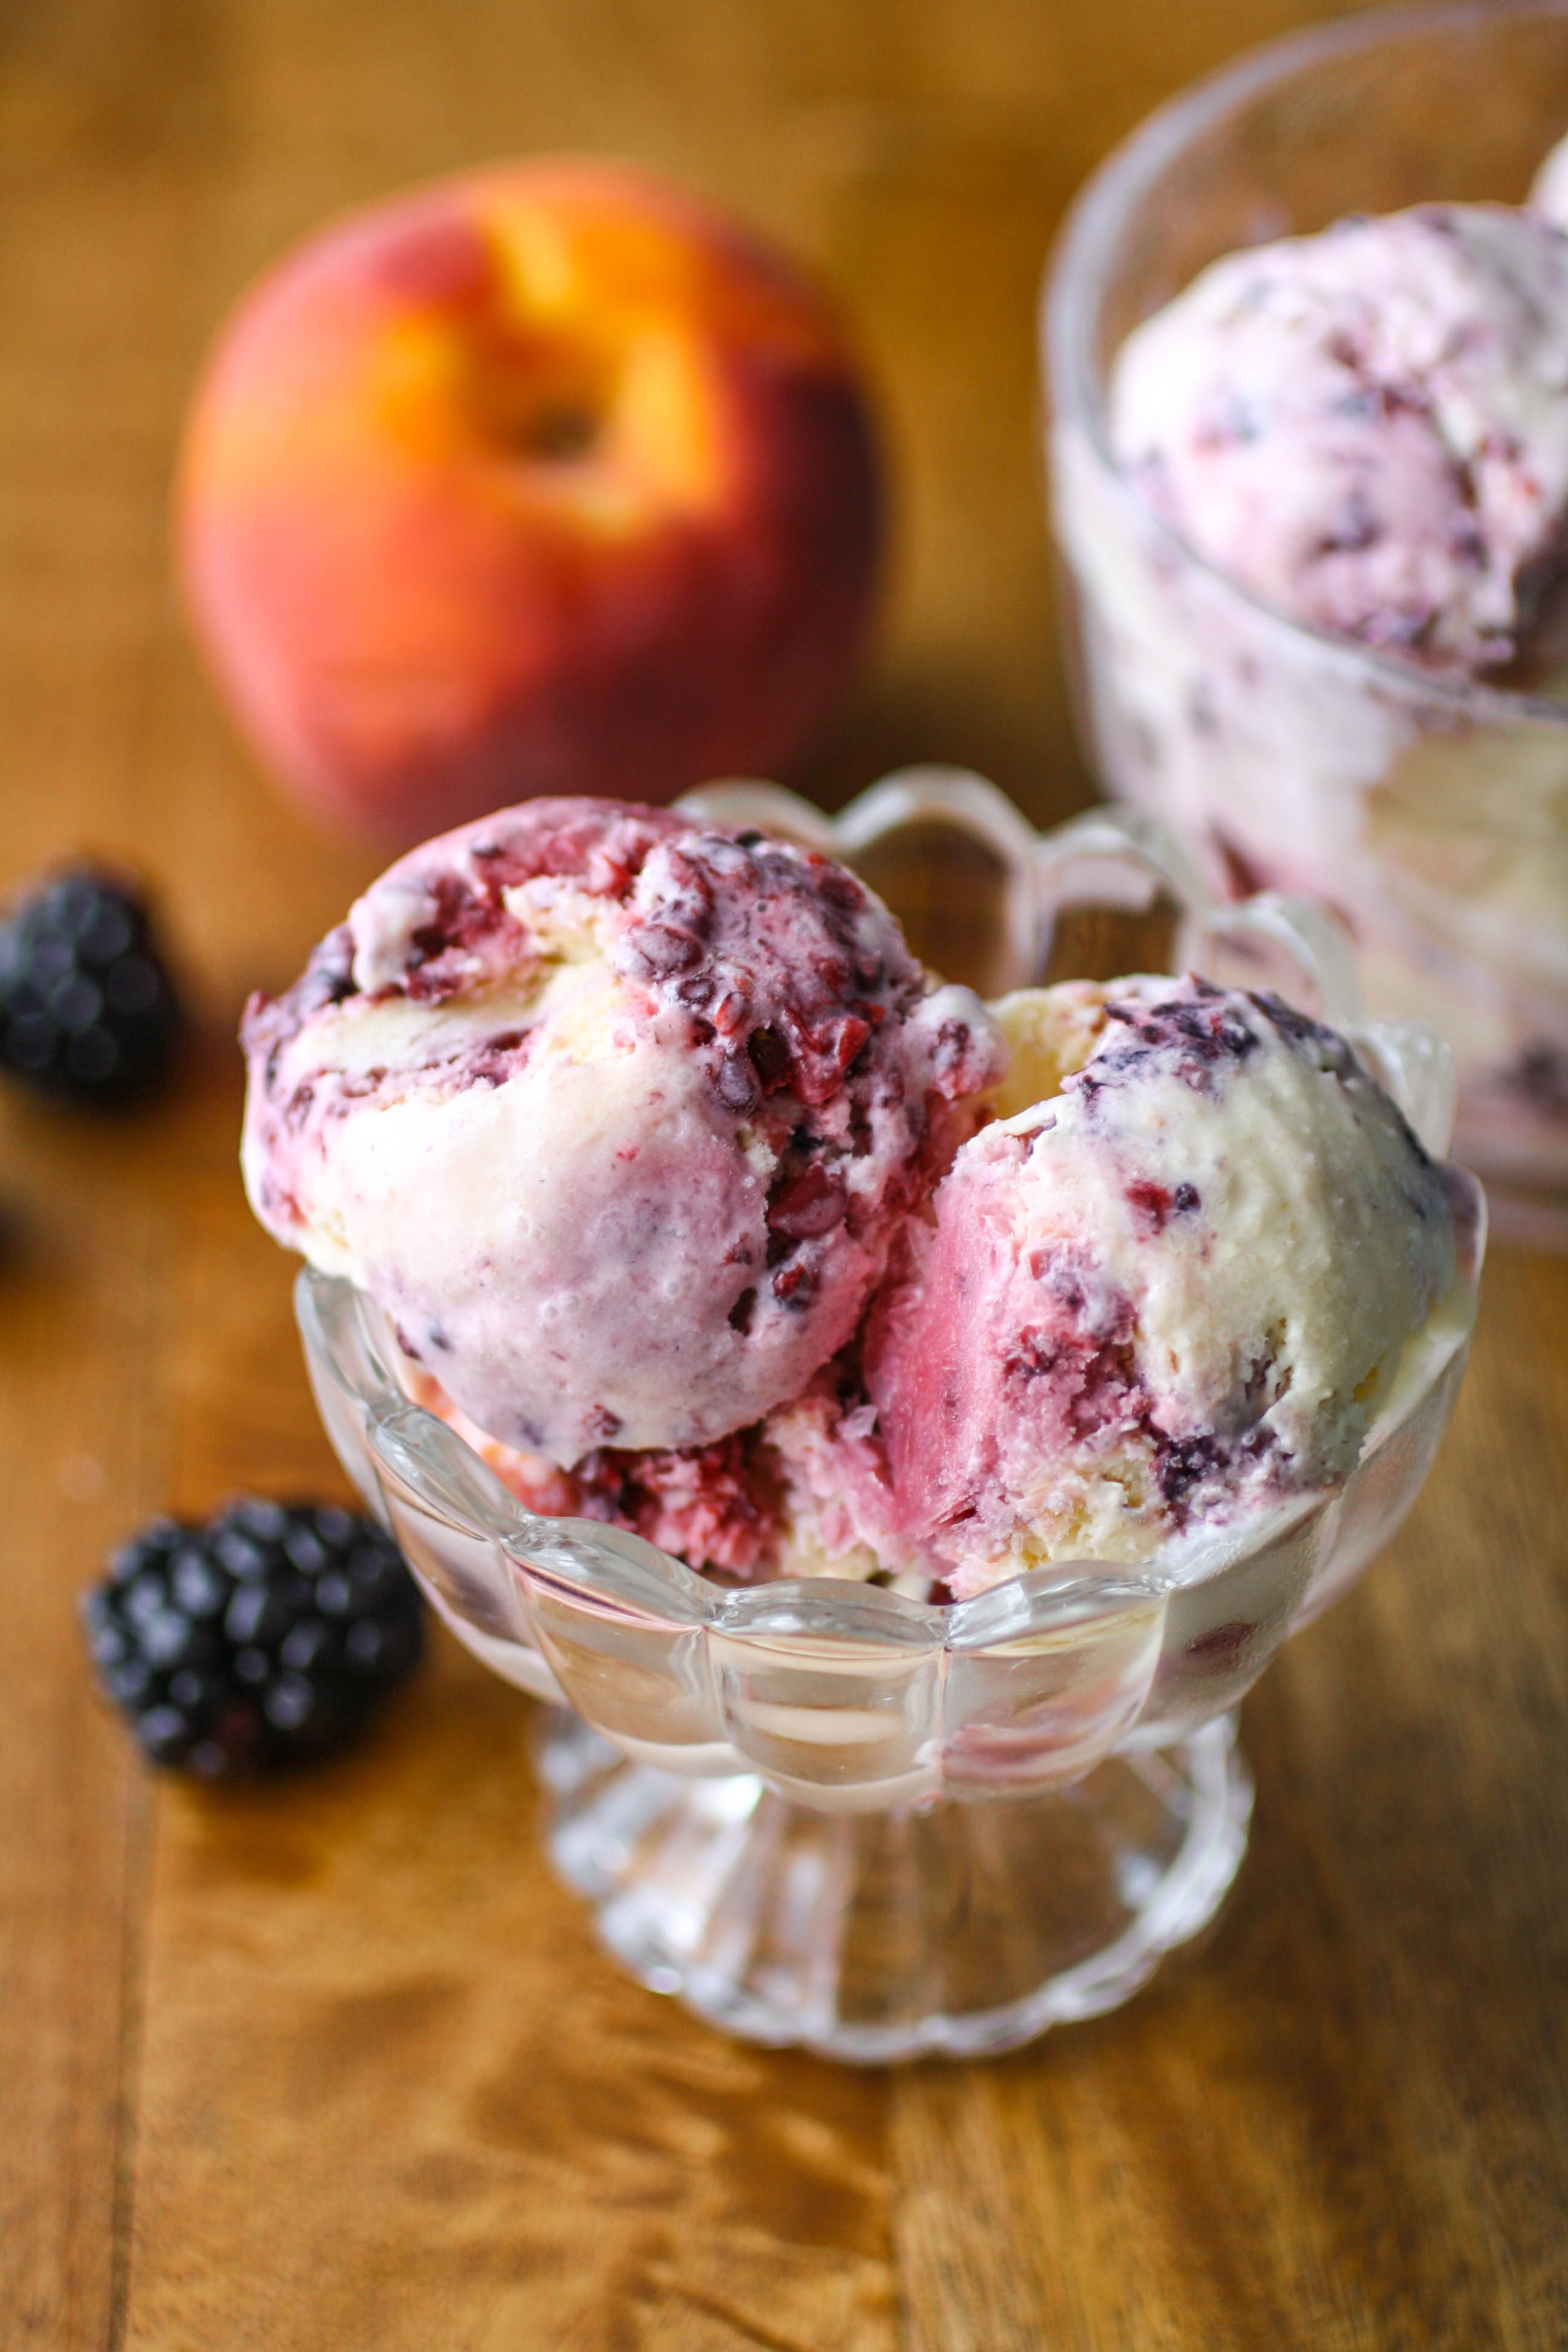 Peach, Lavender, and Blackberry Ice Cream is an amazing summer treat. Peach, Lavender, and Blackberry Ice Cream makes a fun ice cream option to try!